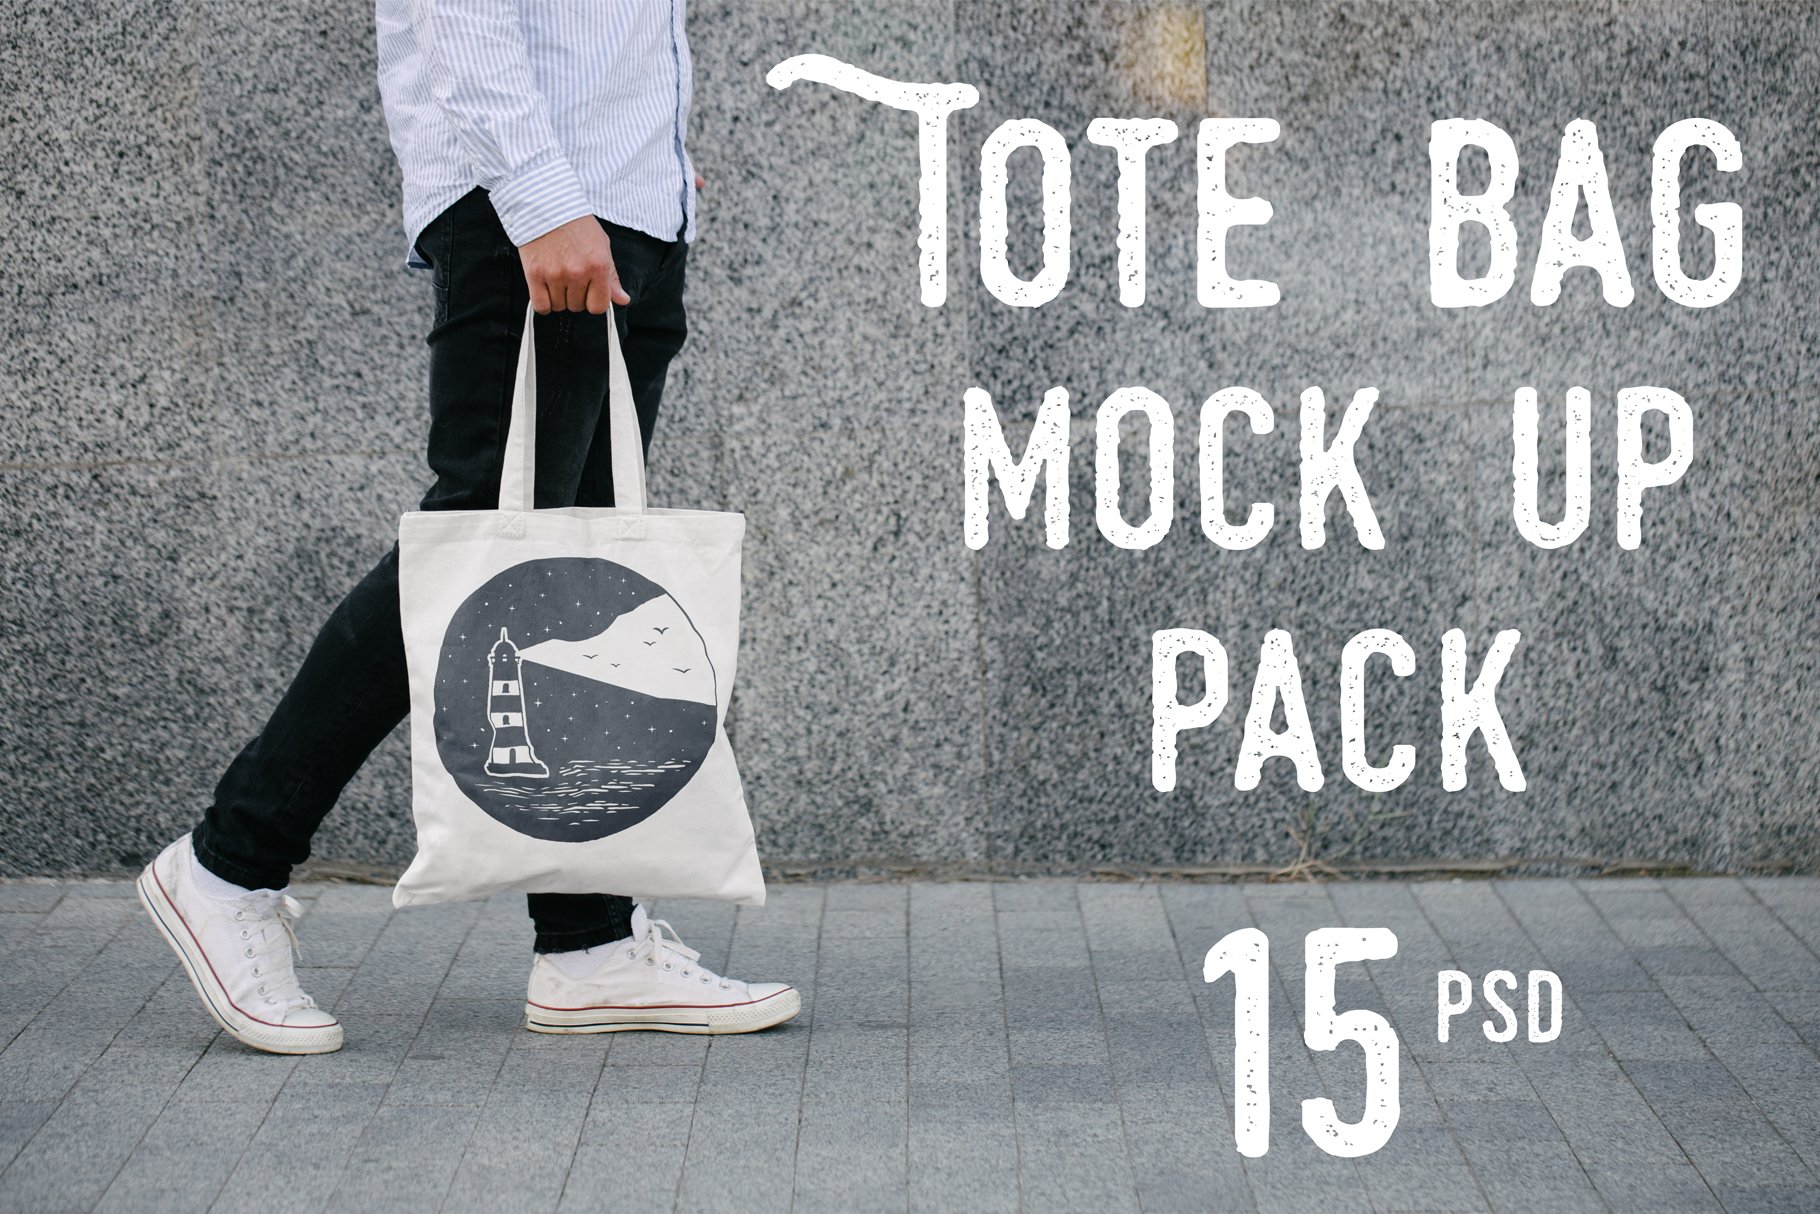 Tote Bag Mock Up Pack cover image.